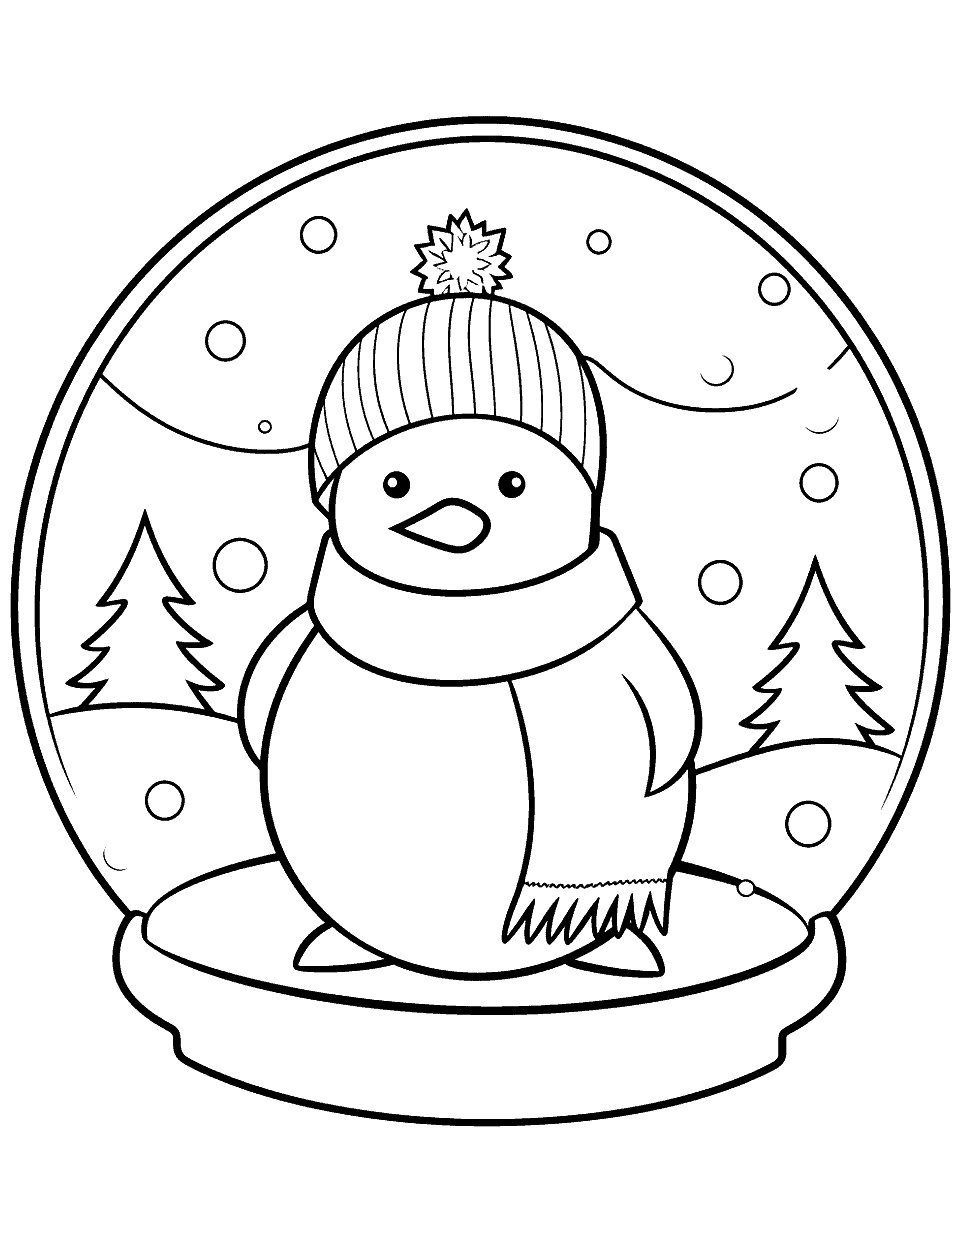 Pre K Snow Globe Winter Coloring Page - A simple snow globe with a penguin inside, ideal for Pre-K.